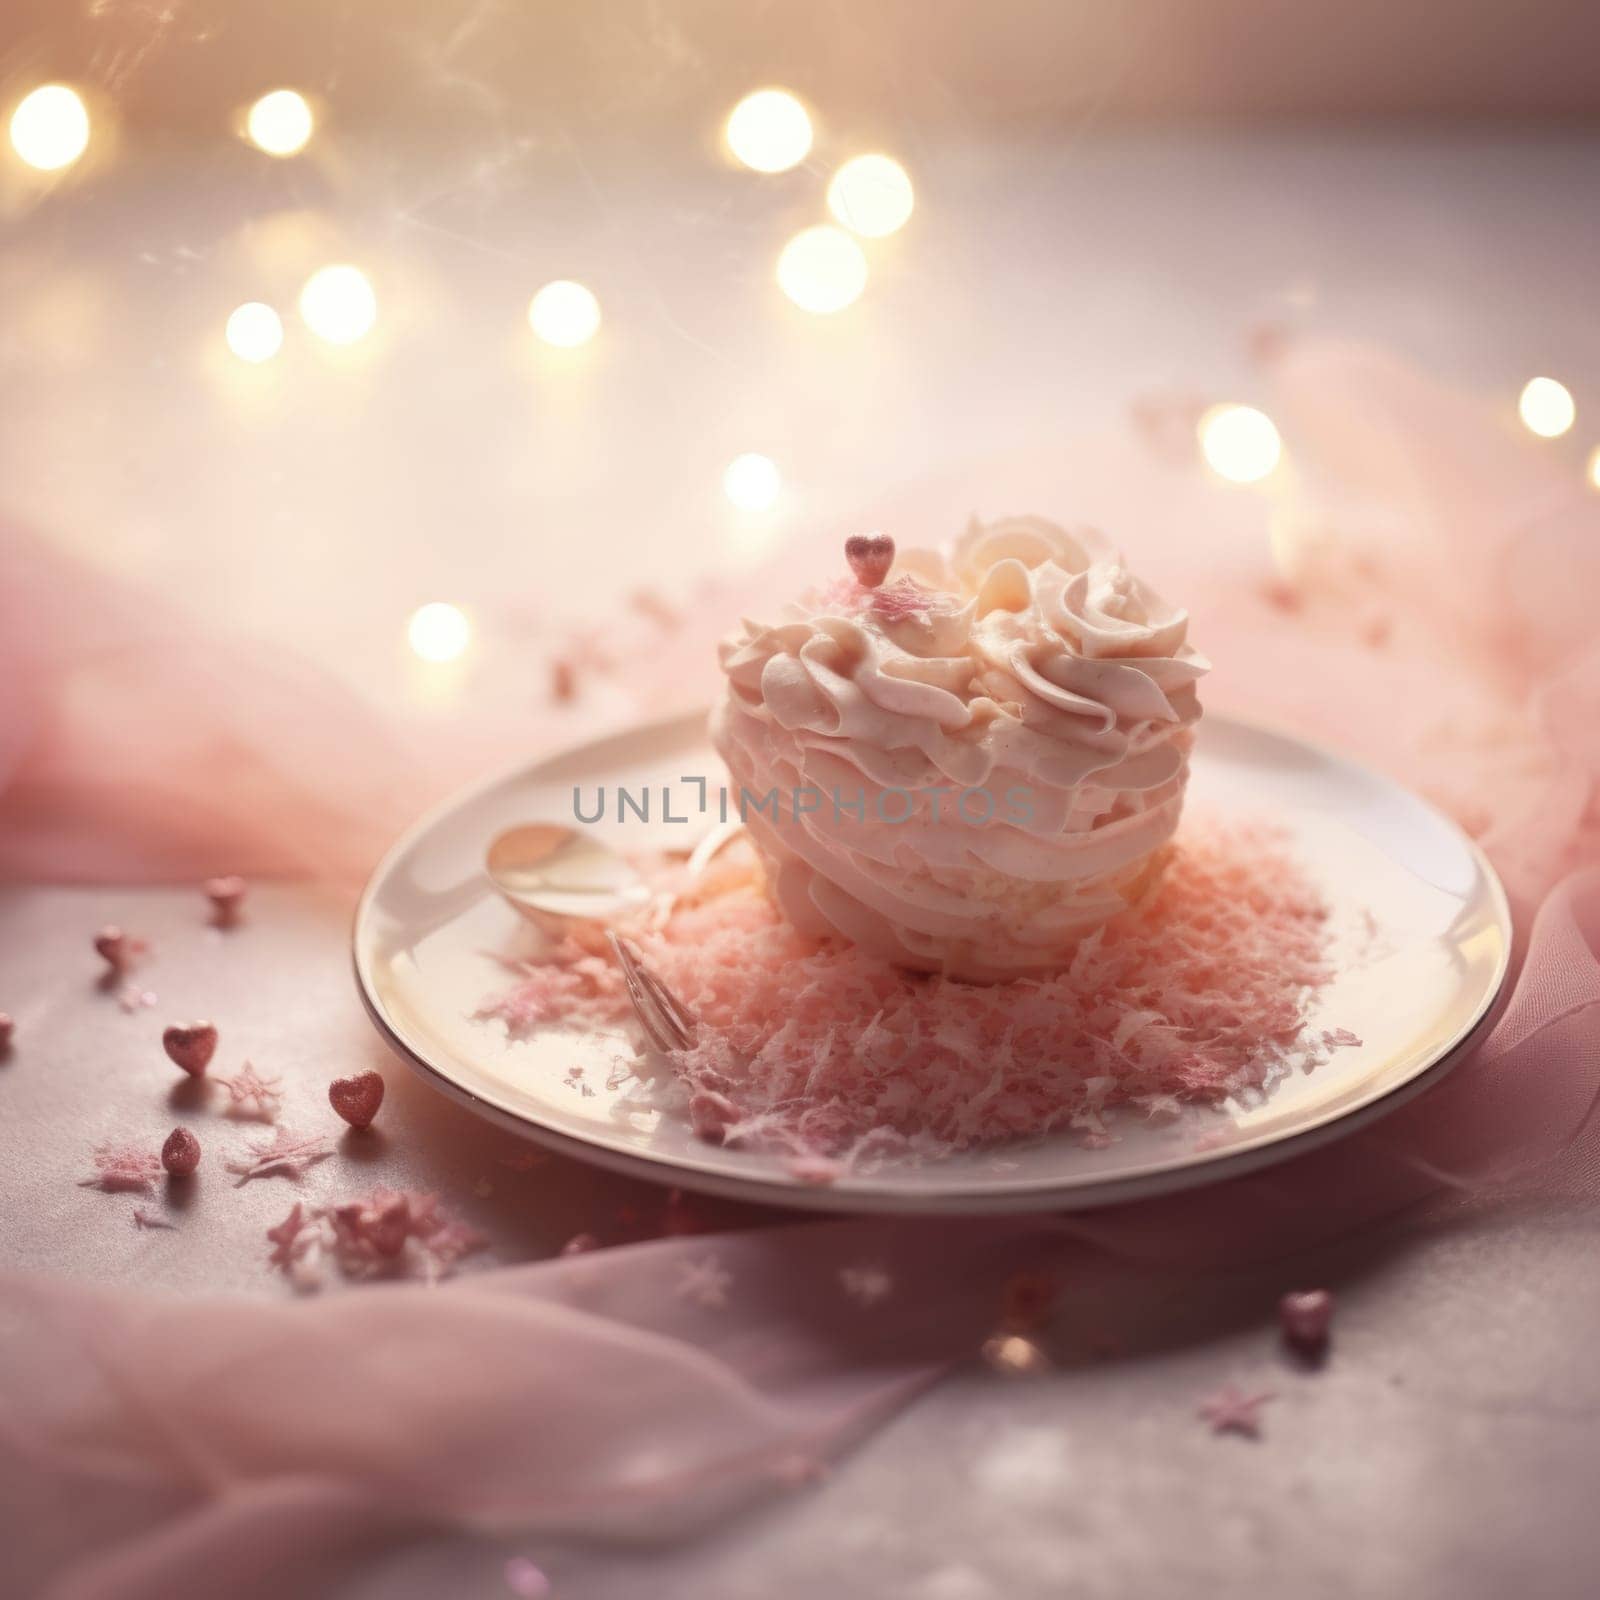 A cupcake on a plate with pink frosting, AI by starush